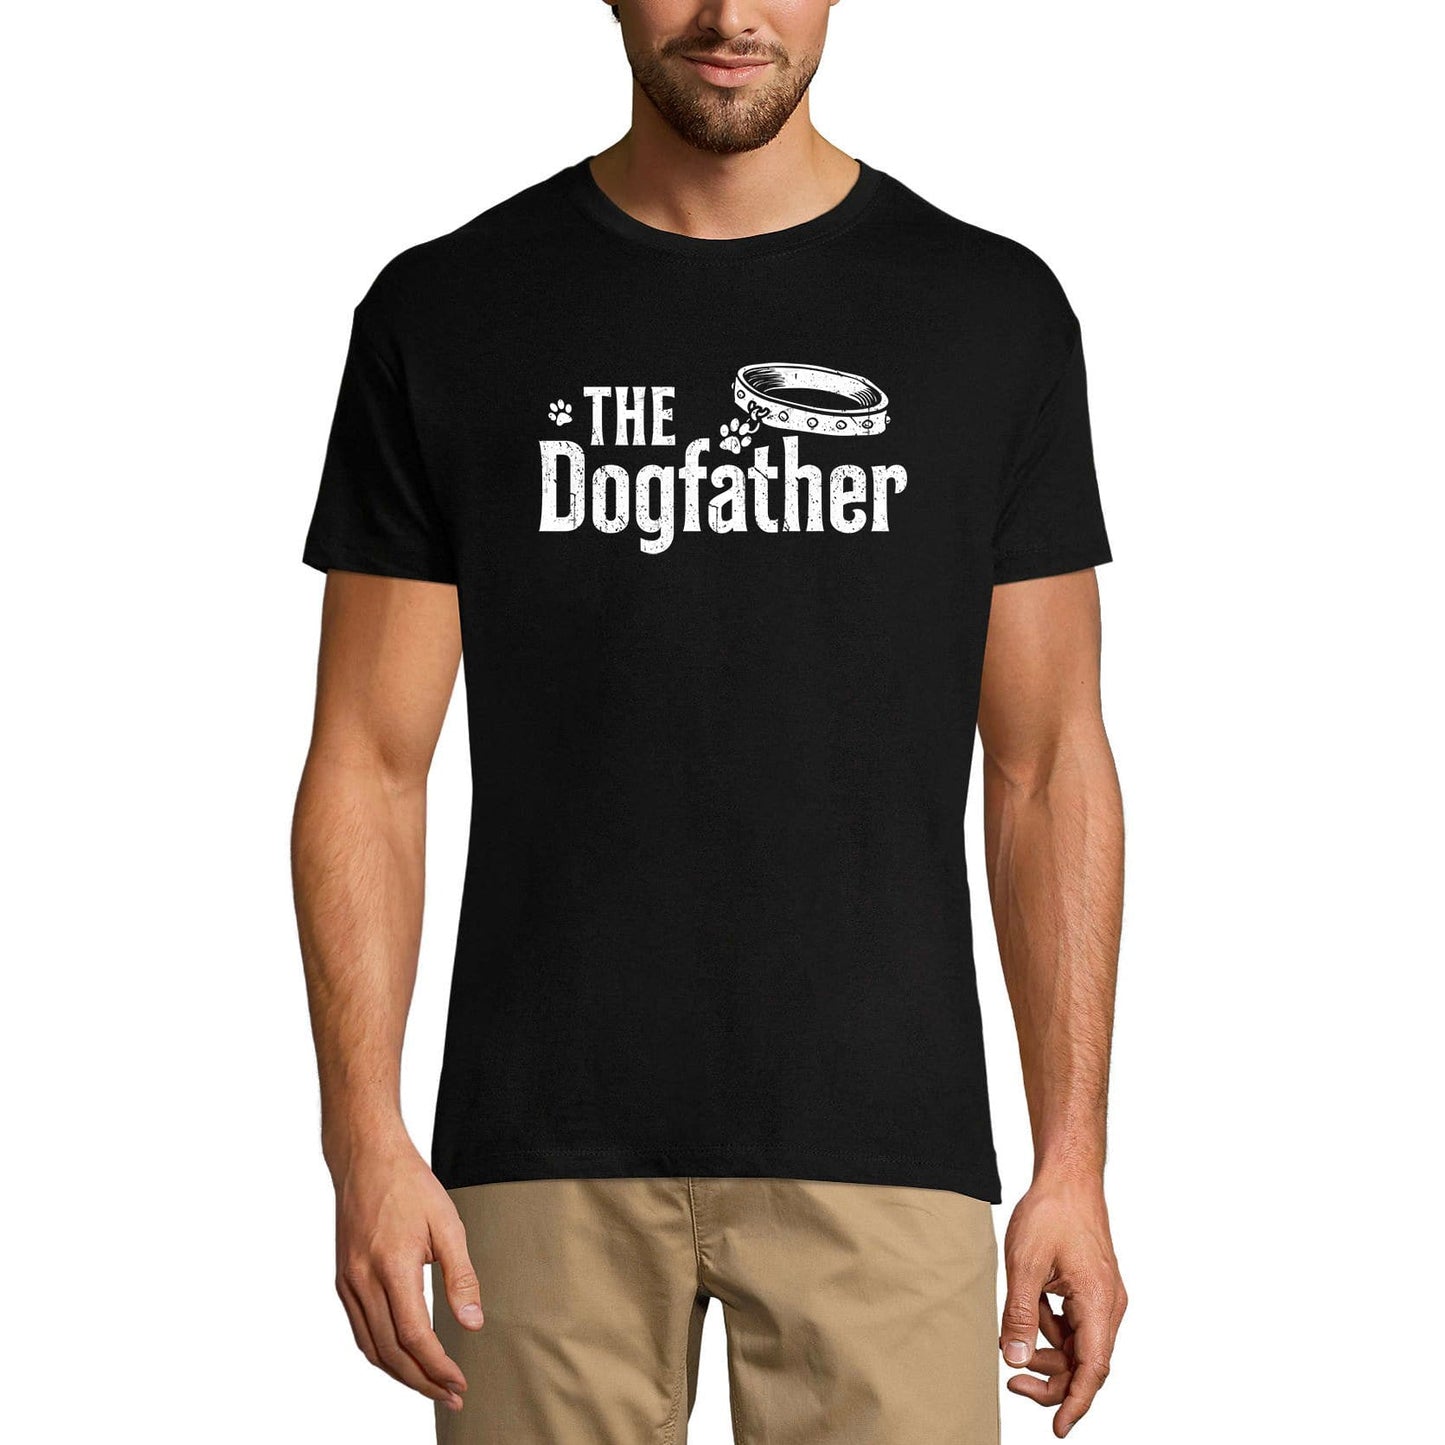 ULTRABASIC Men's Graphic T-Shirt The Dogfather - Cute Dog Paws - Vintage Shirt